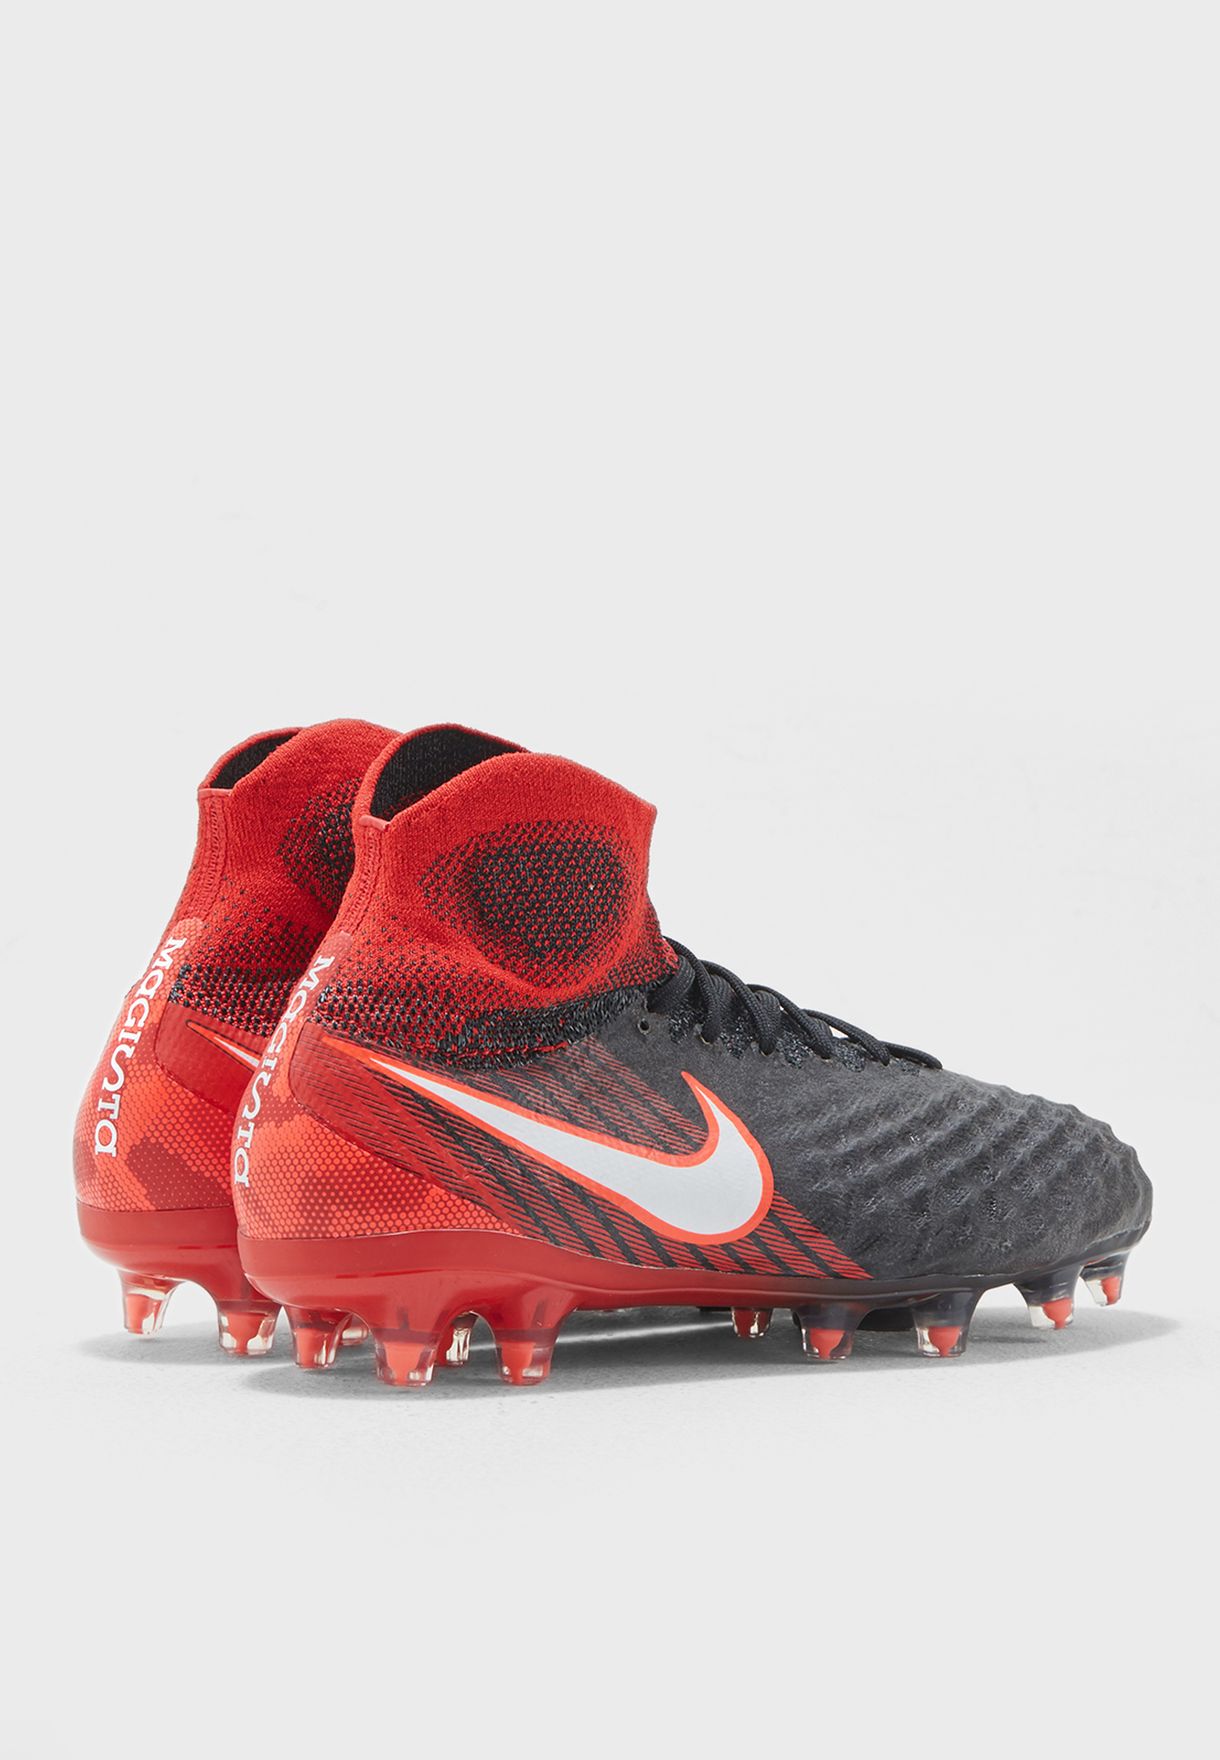 Nike Magista Obra II Time To Shine Pack Boots Released Footy